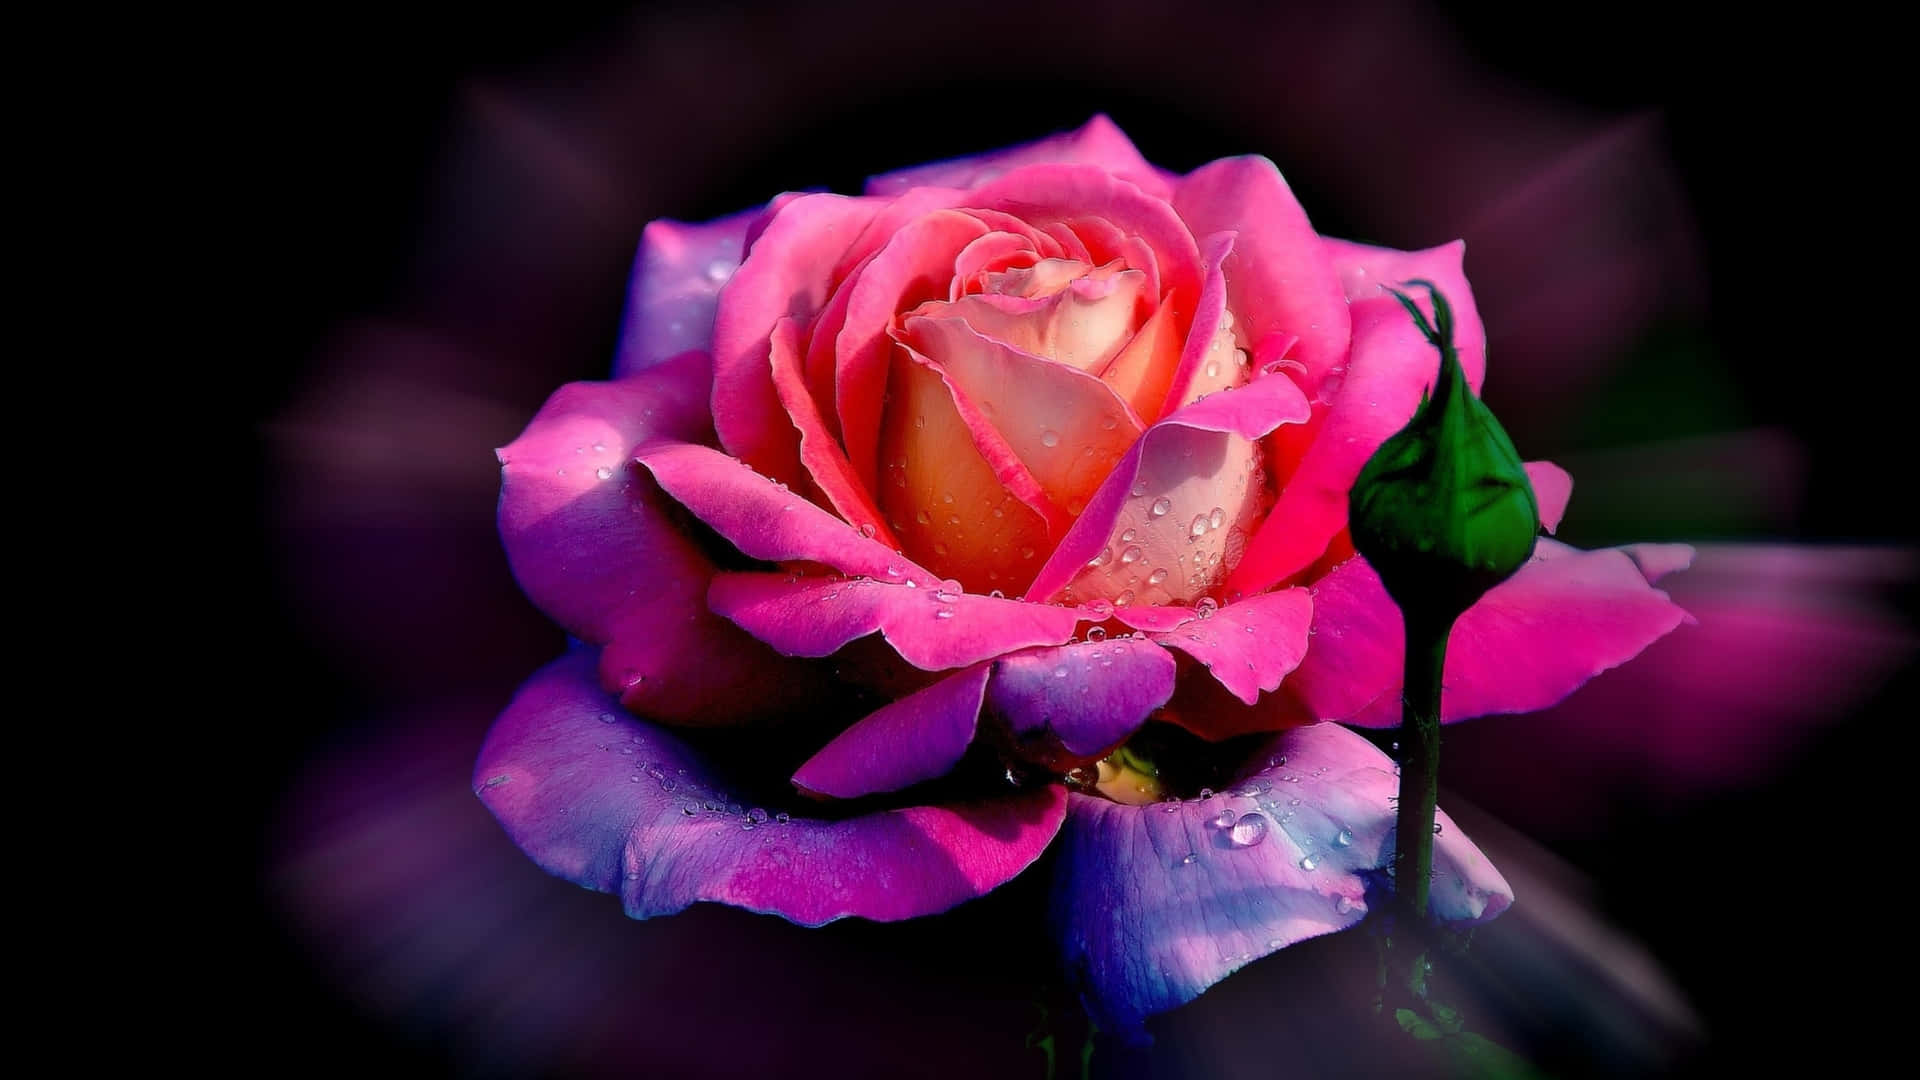 1440p Purple And Pink Rose Background